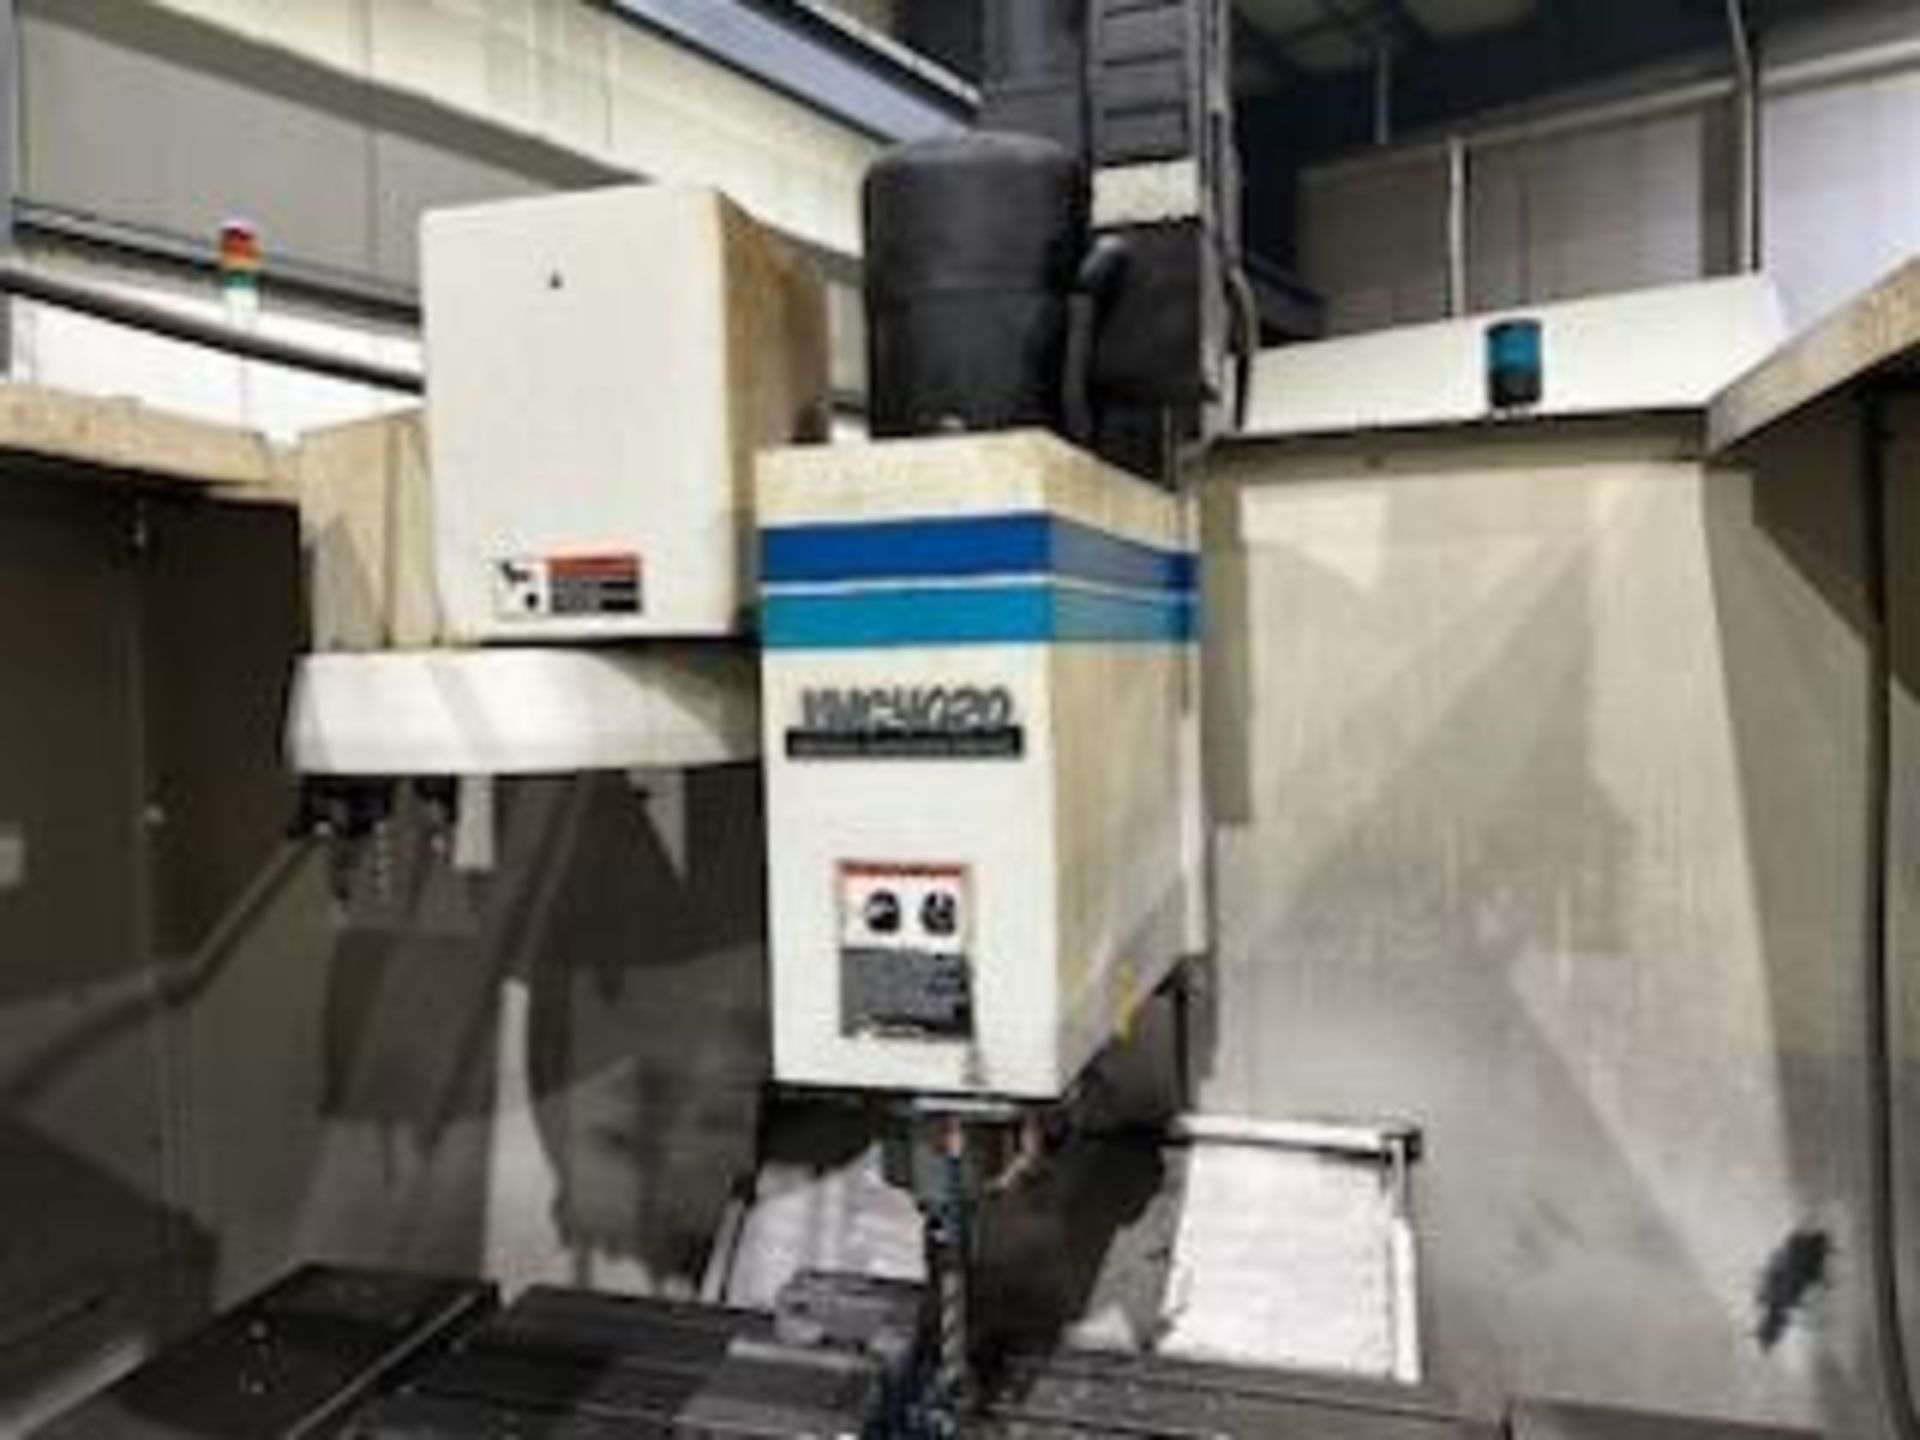 1995 FADAL 4020 CNC VERTICAL MACHINING CENTER - Image 2 of 9